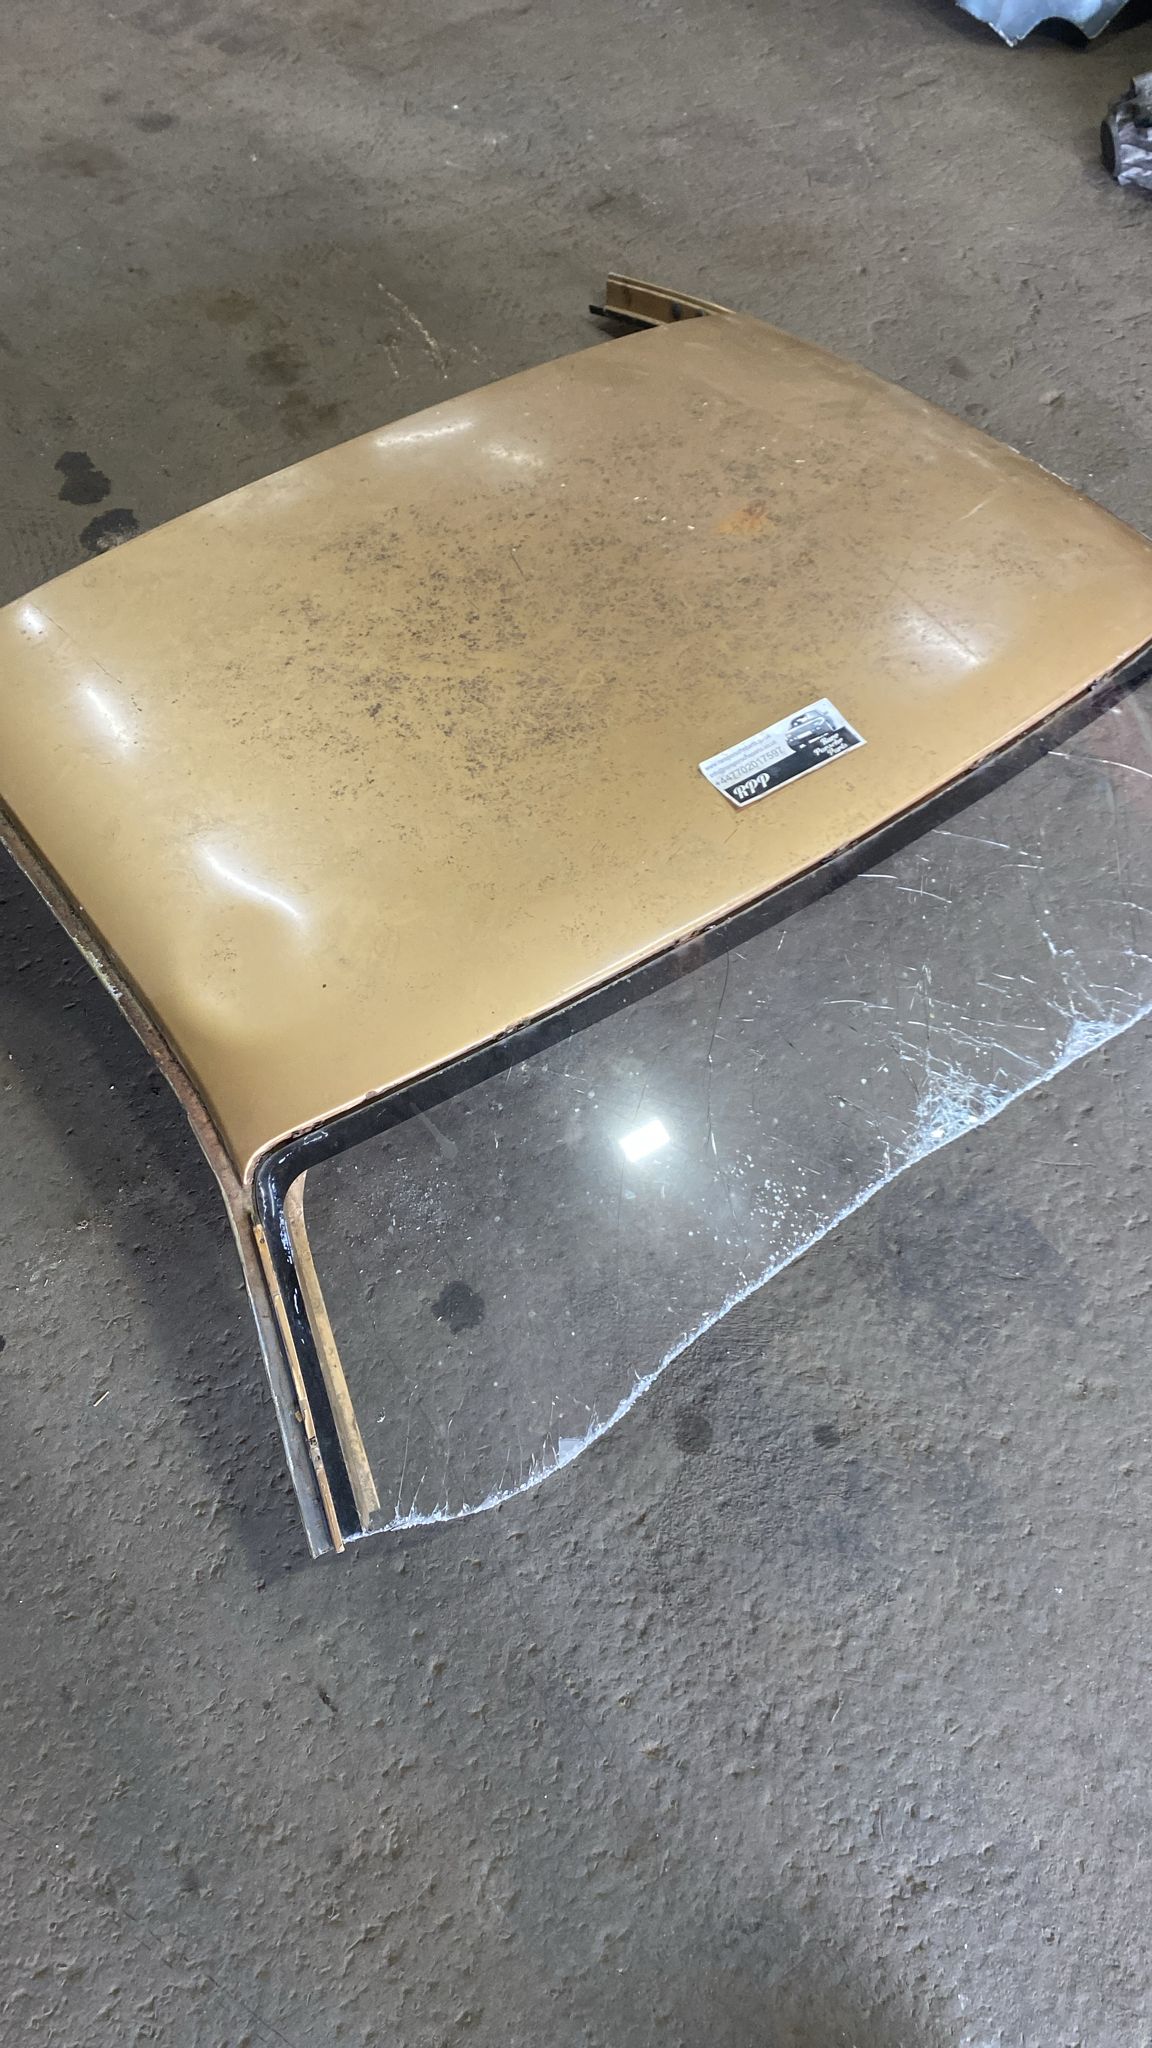 Porsche 928 roof cut, used, 92850350102